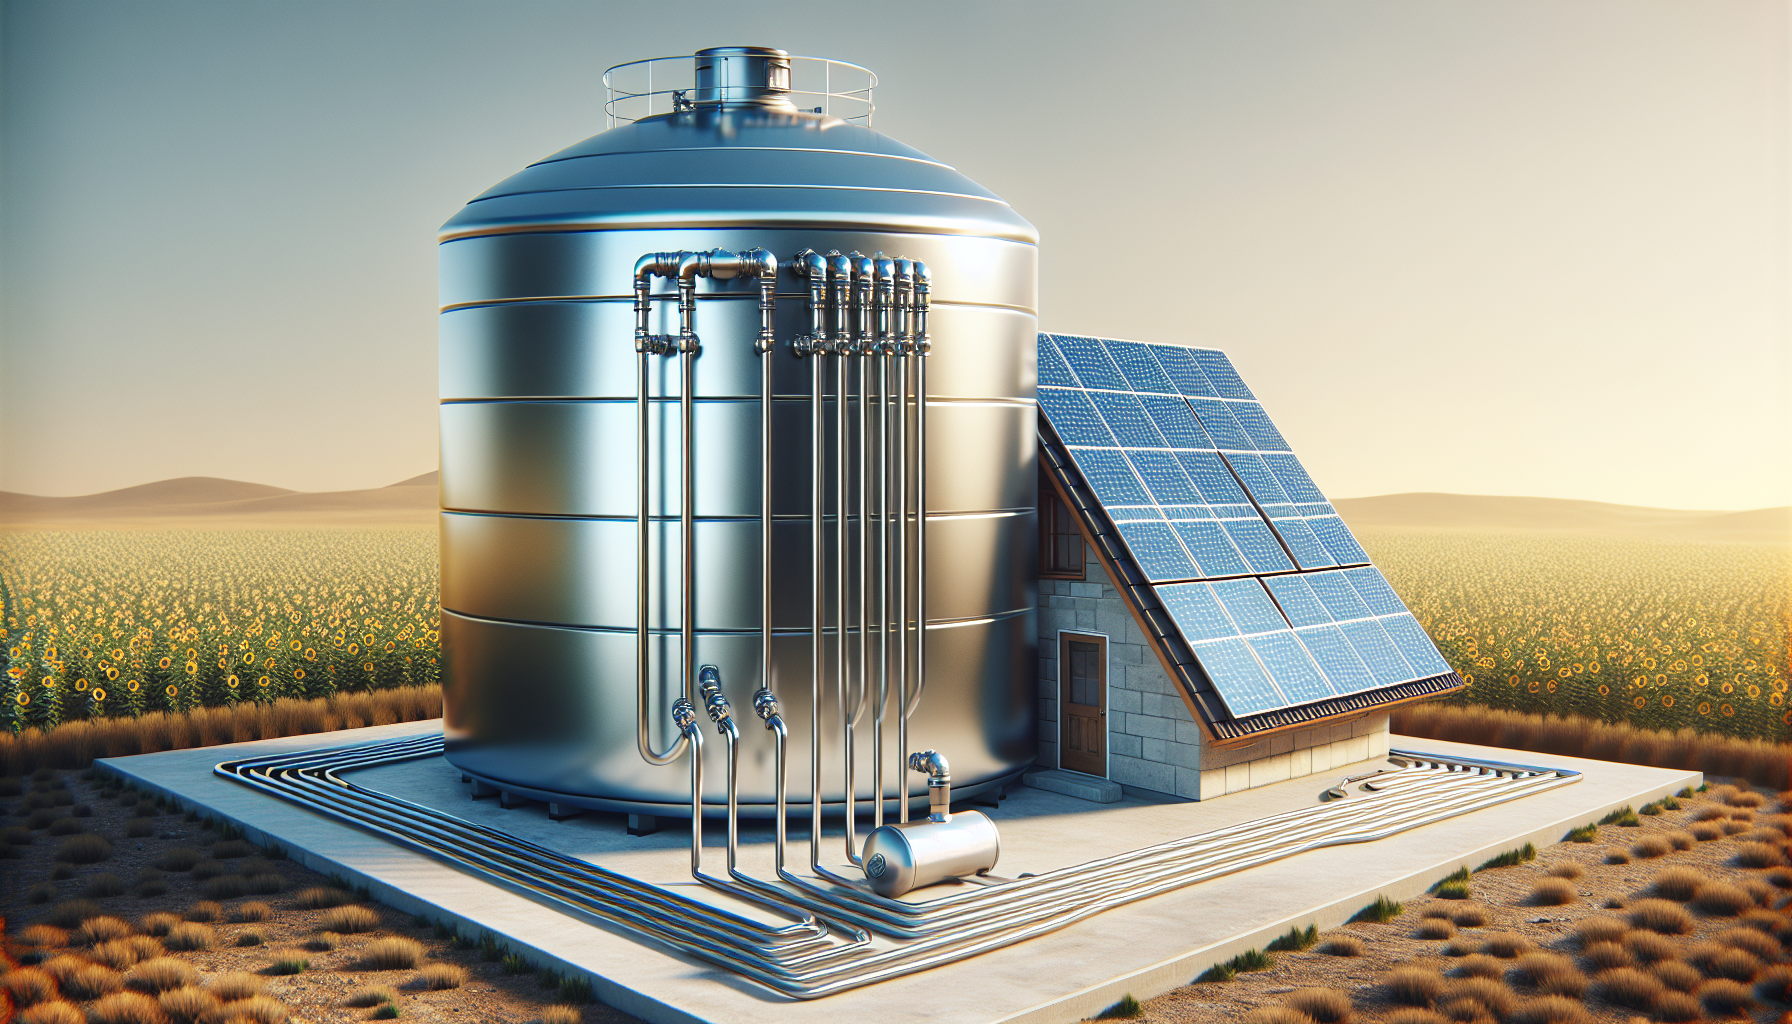 Ground-mounted storage tank for solar hot water system